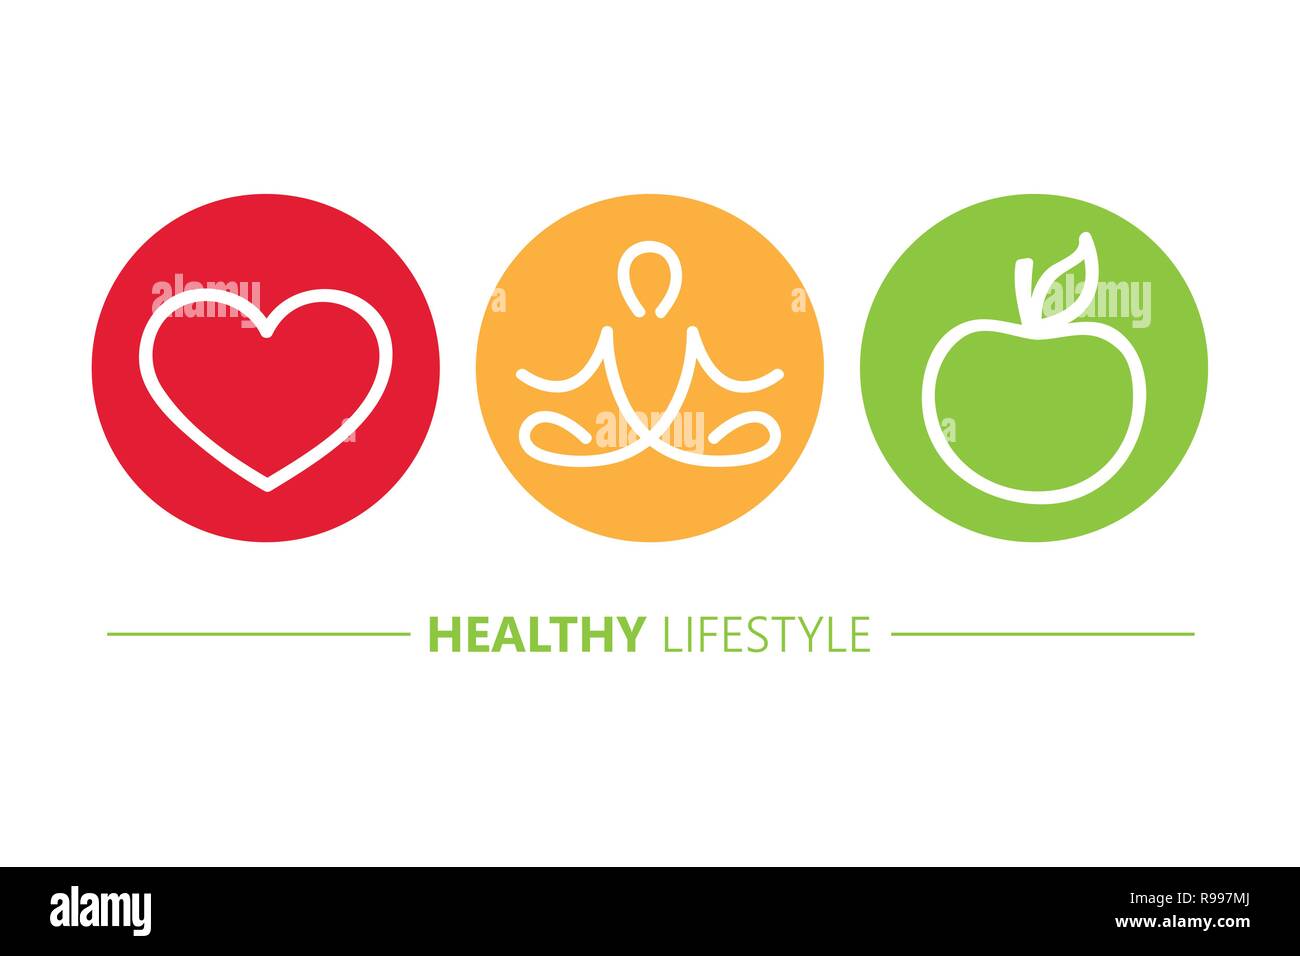 healthy lifestyle icons heart yoga and apple vector illustration EPS10 Stock Vector